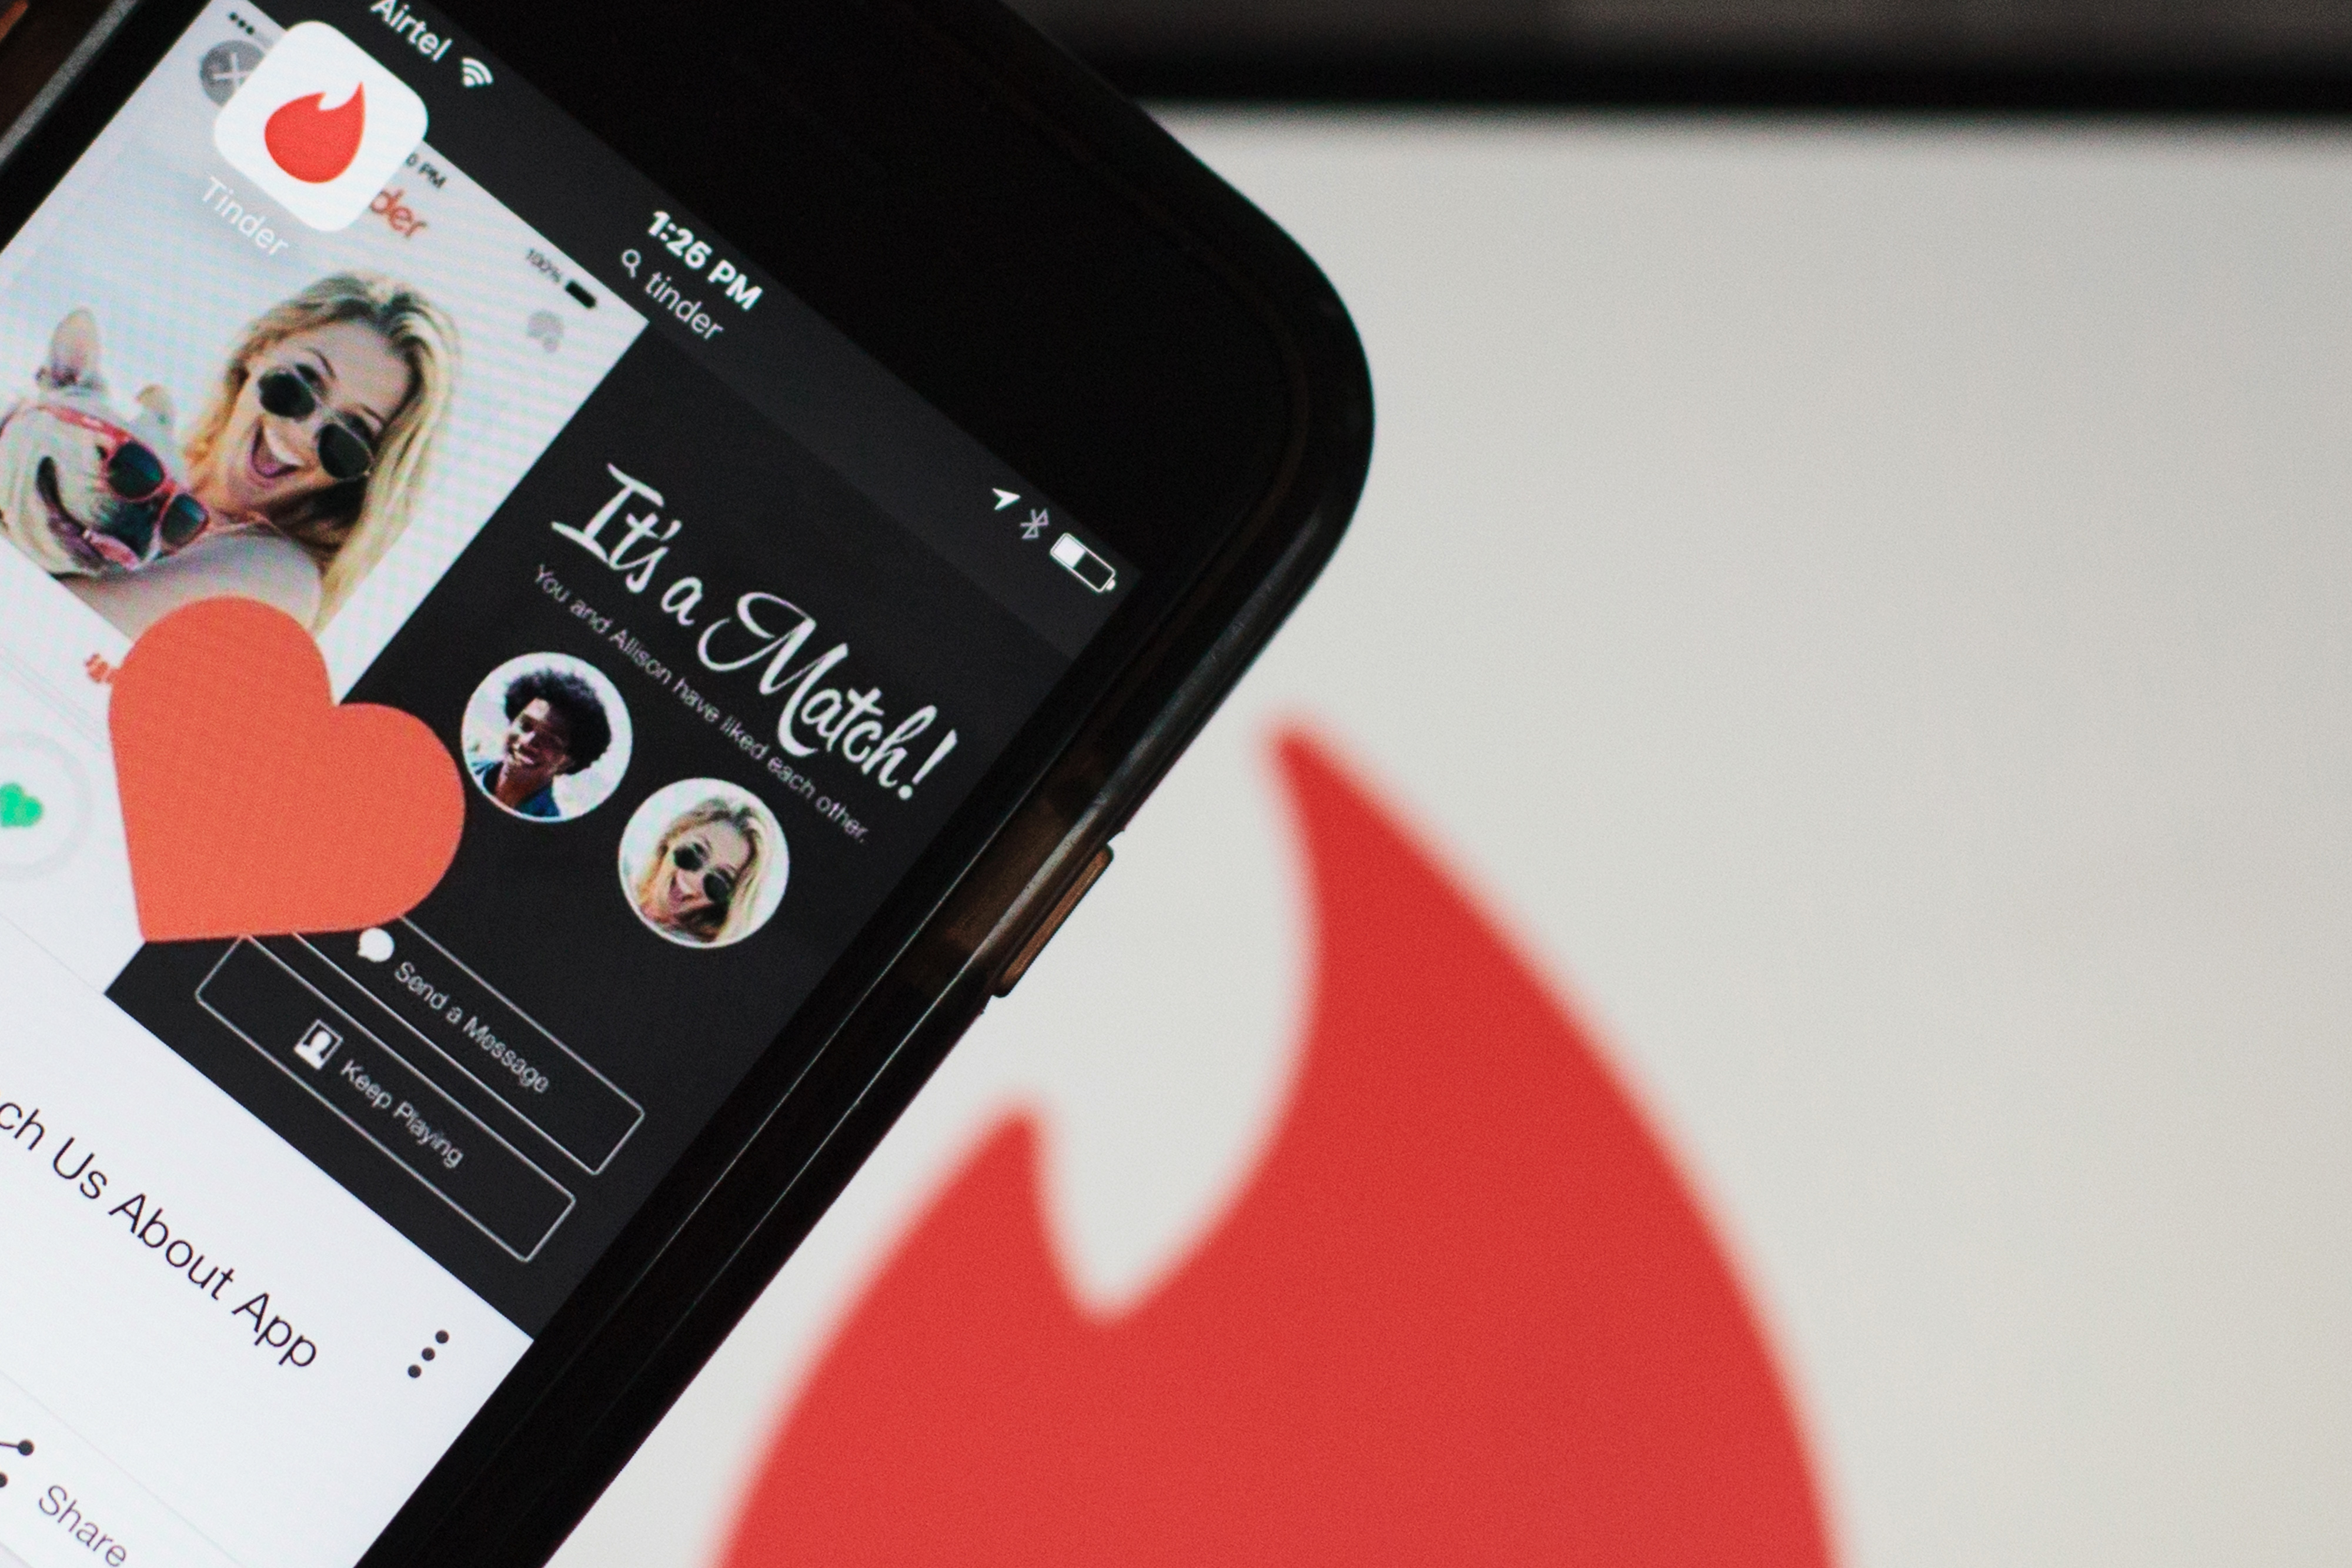 The Tinder Inc. application is displayed on a smartphone in an arranged photograph in New Delhi, India, on Friday, July 29, 2016. (Sara Hylton&mdash;Bloomberg /Getty Images)